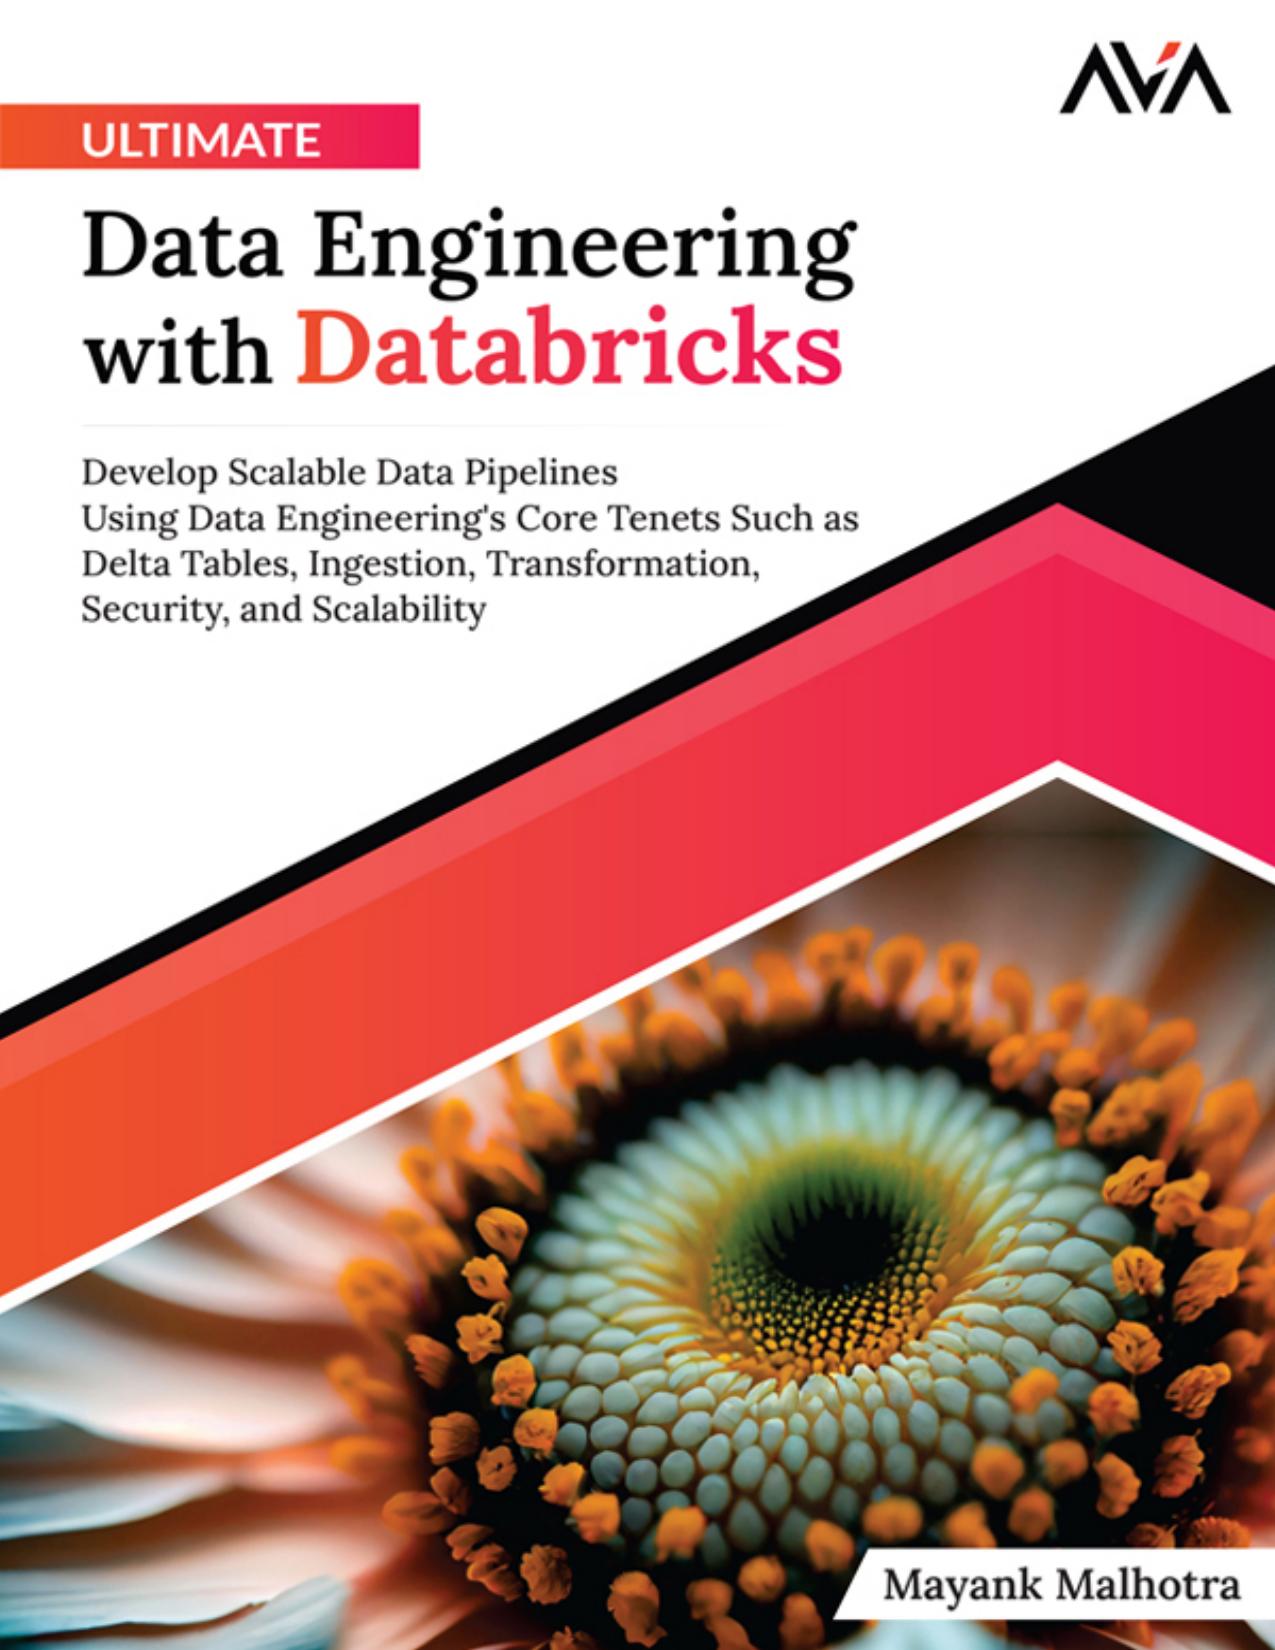 Ultimate Data Engineering With Databricks: Develop Scalable Data Pipelines Using Data Engineering's Core Tenets Such as Delta Tables, Ingestion, Transformation, Security, and Scalability (English Edition)